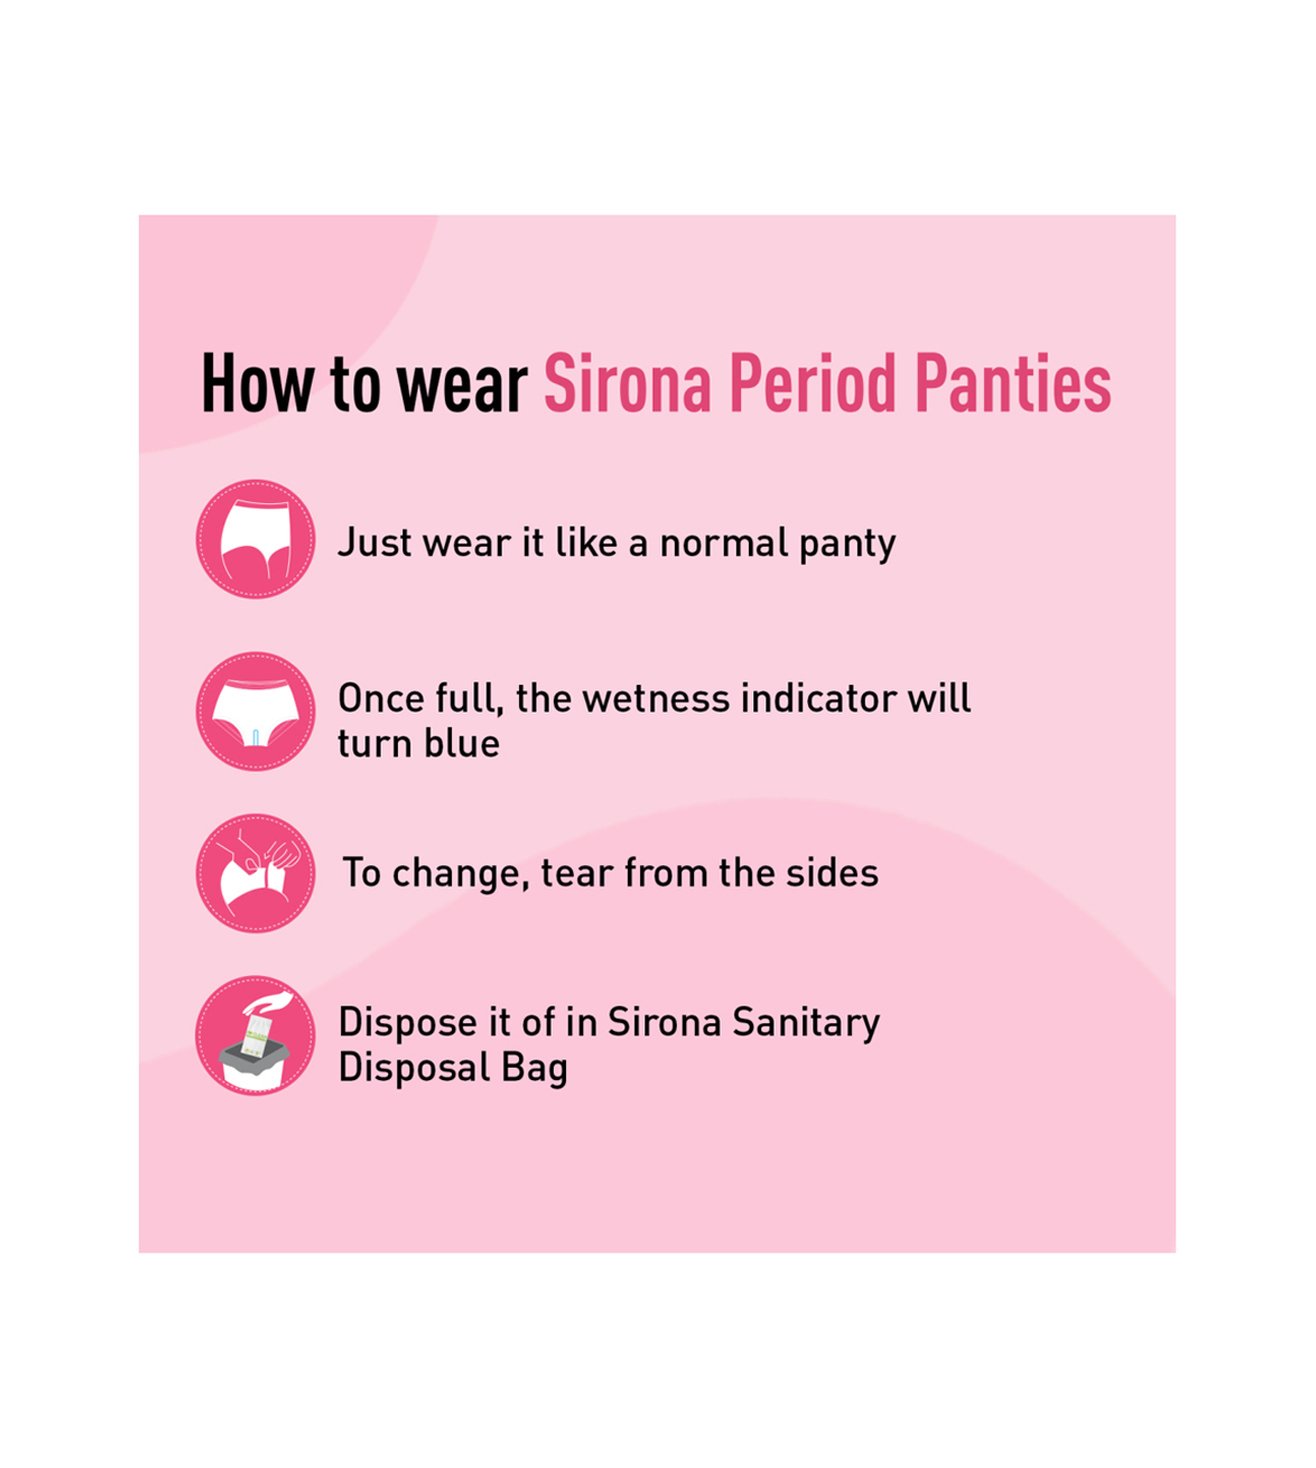 Buy Sirona Disposable Period Panties for Women (S-M) - Pack of 5